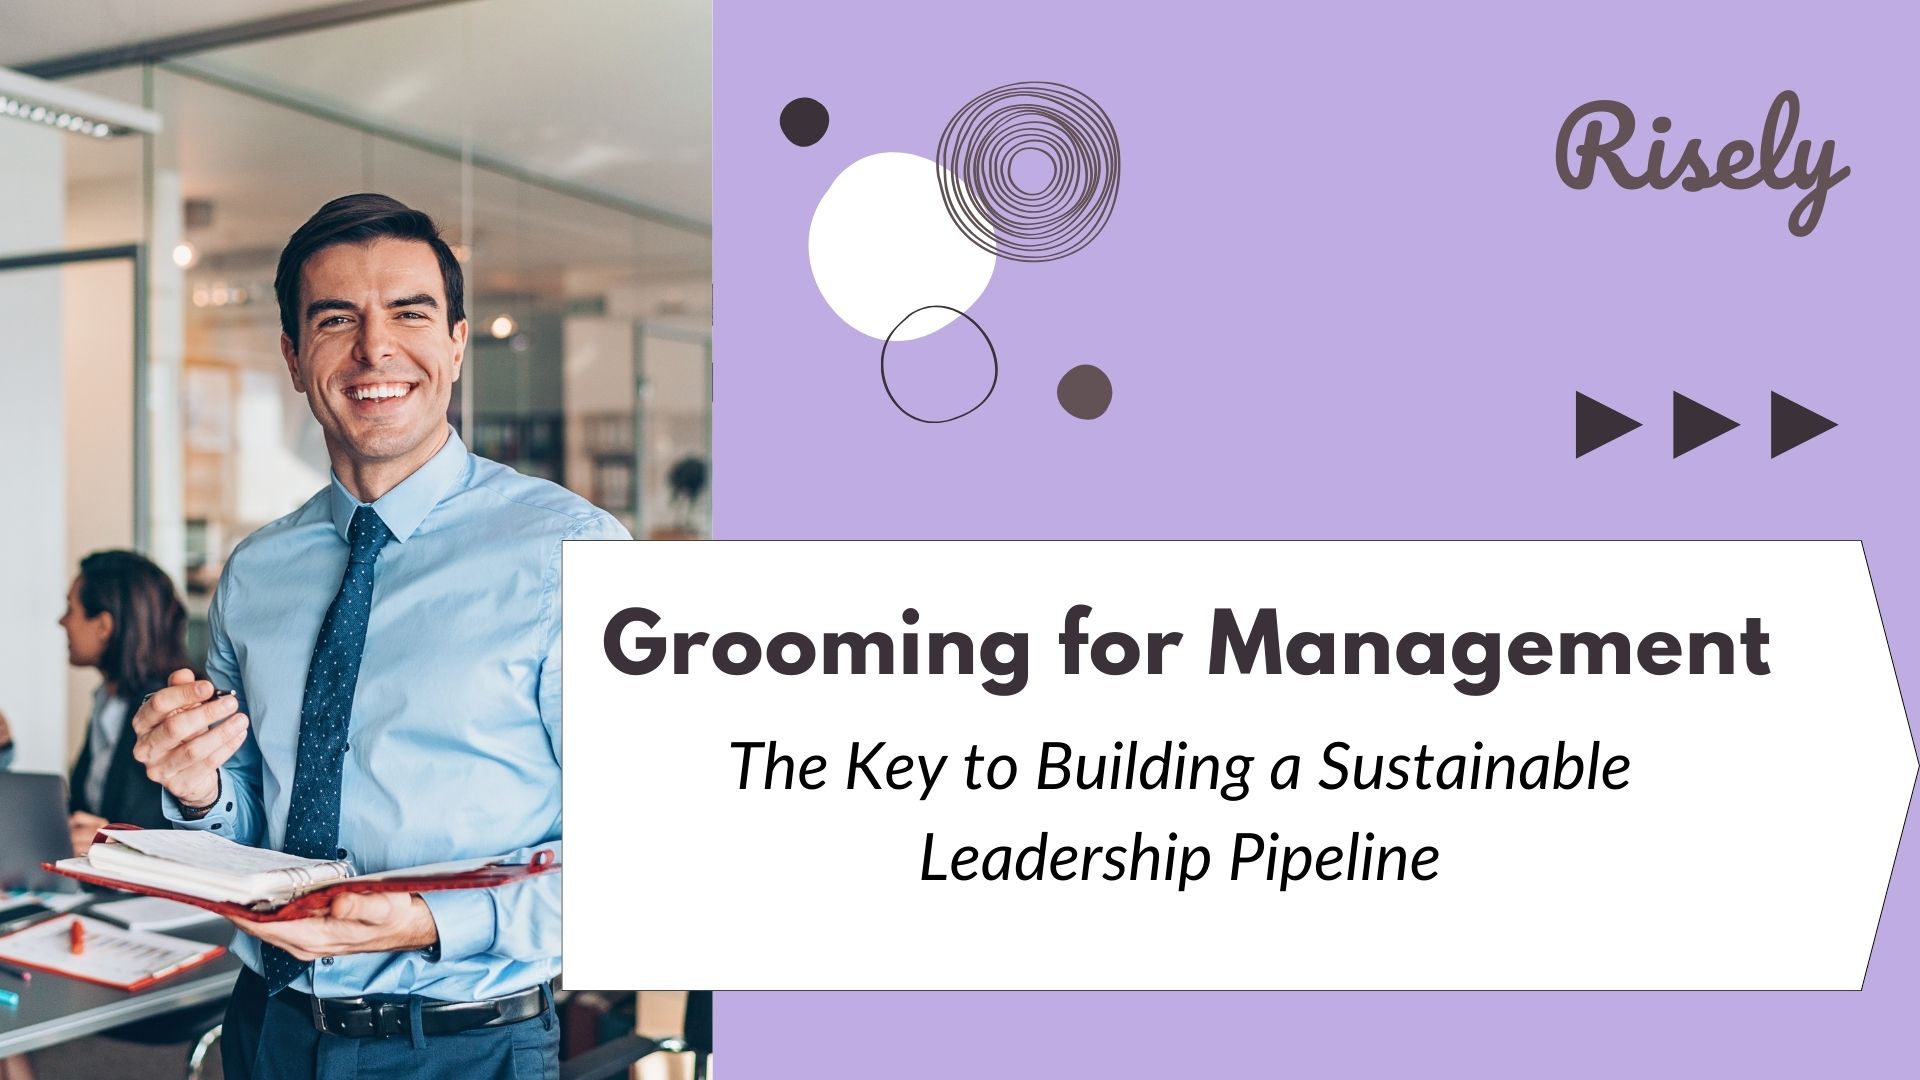 Grooming for Management: The Key to Building a Sustainable Leadership Pipeline